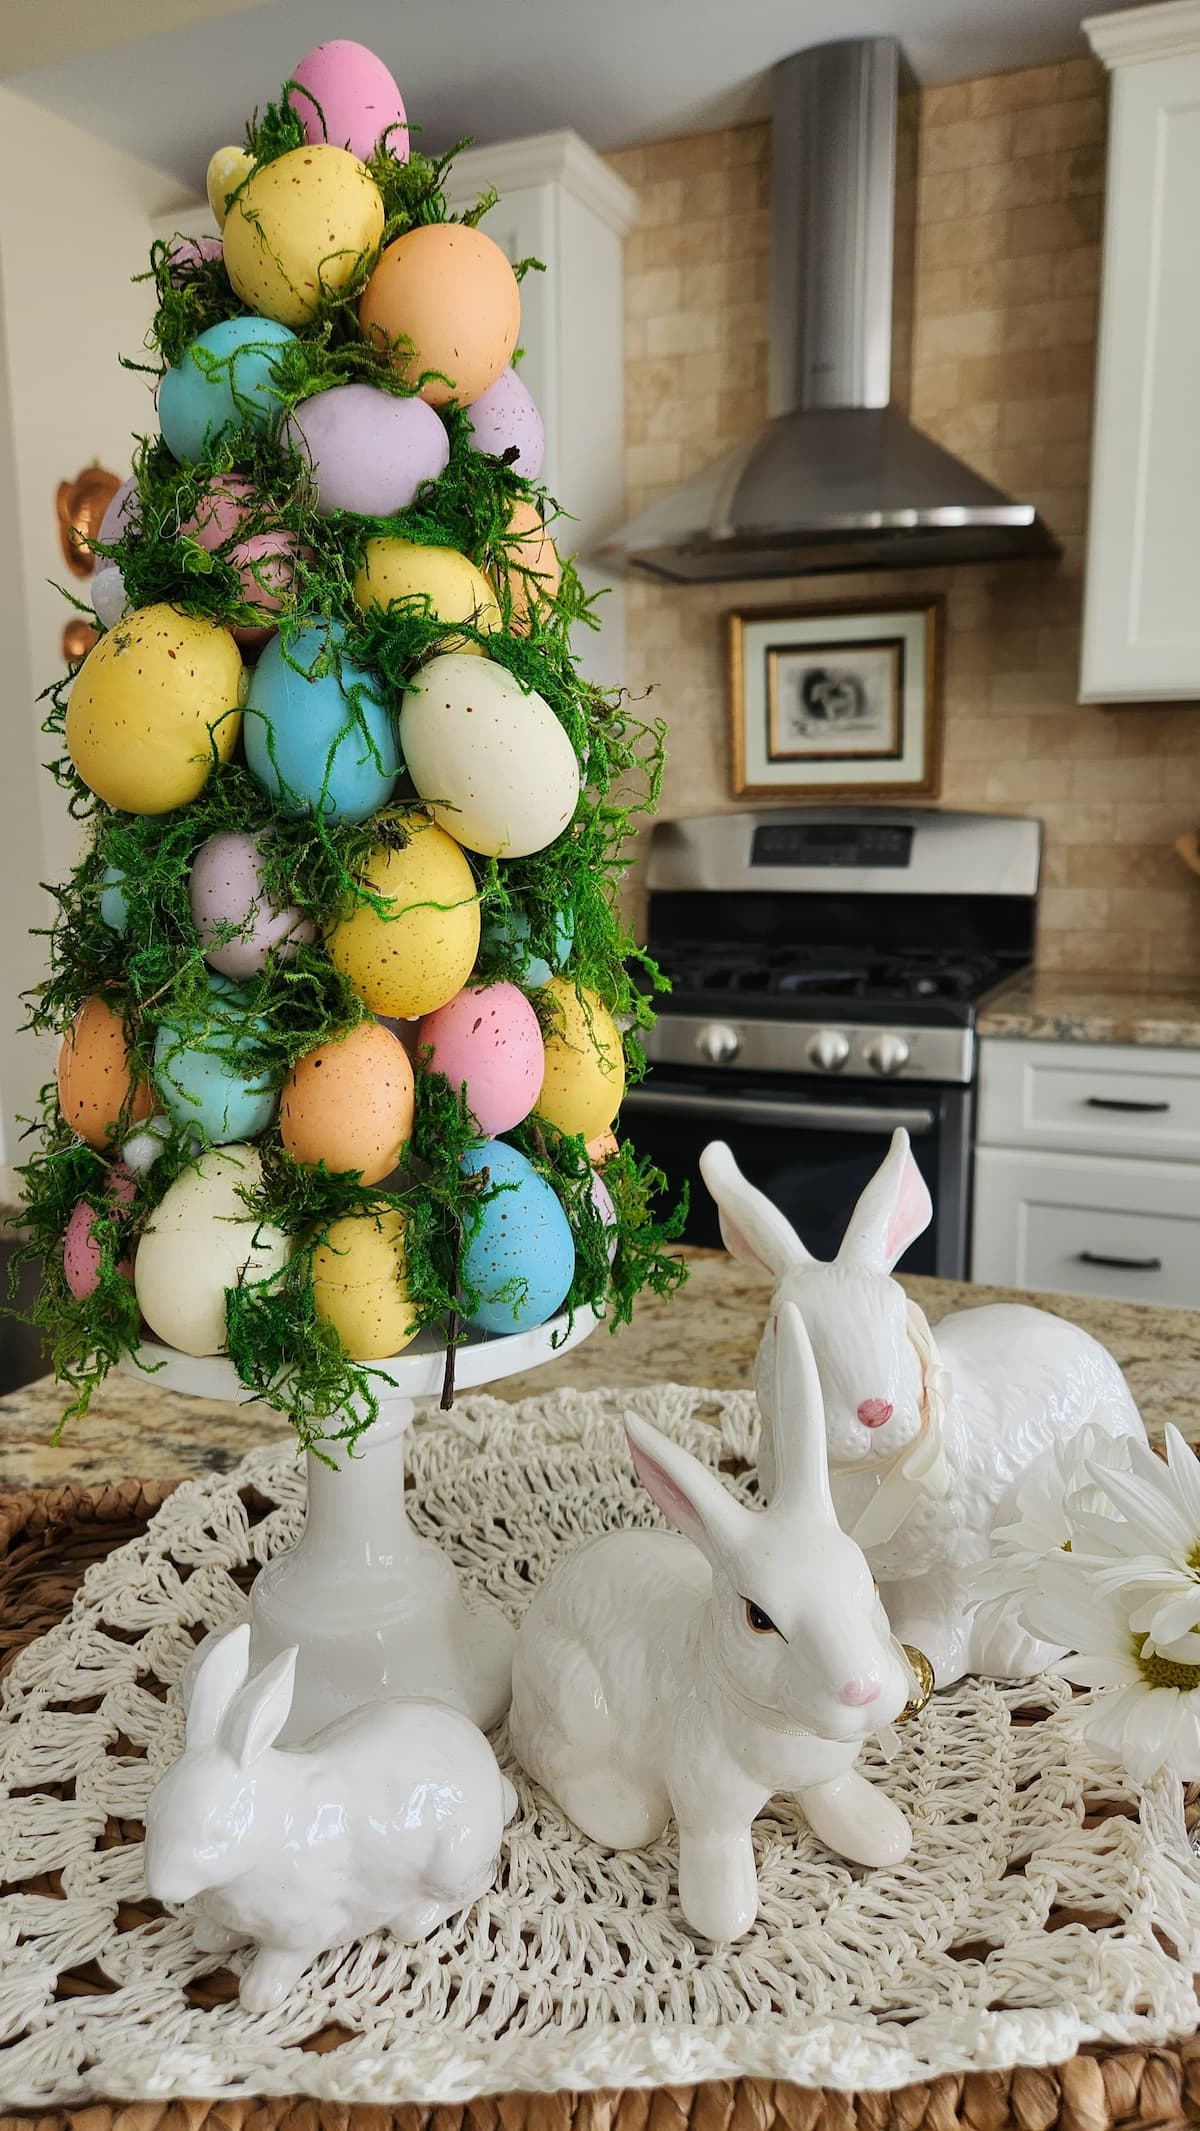 How to Make an Easy Easter Egg Topiary Tree